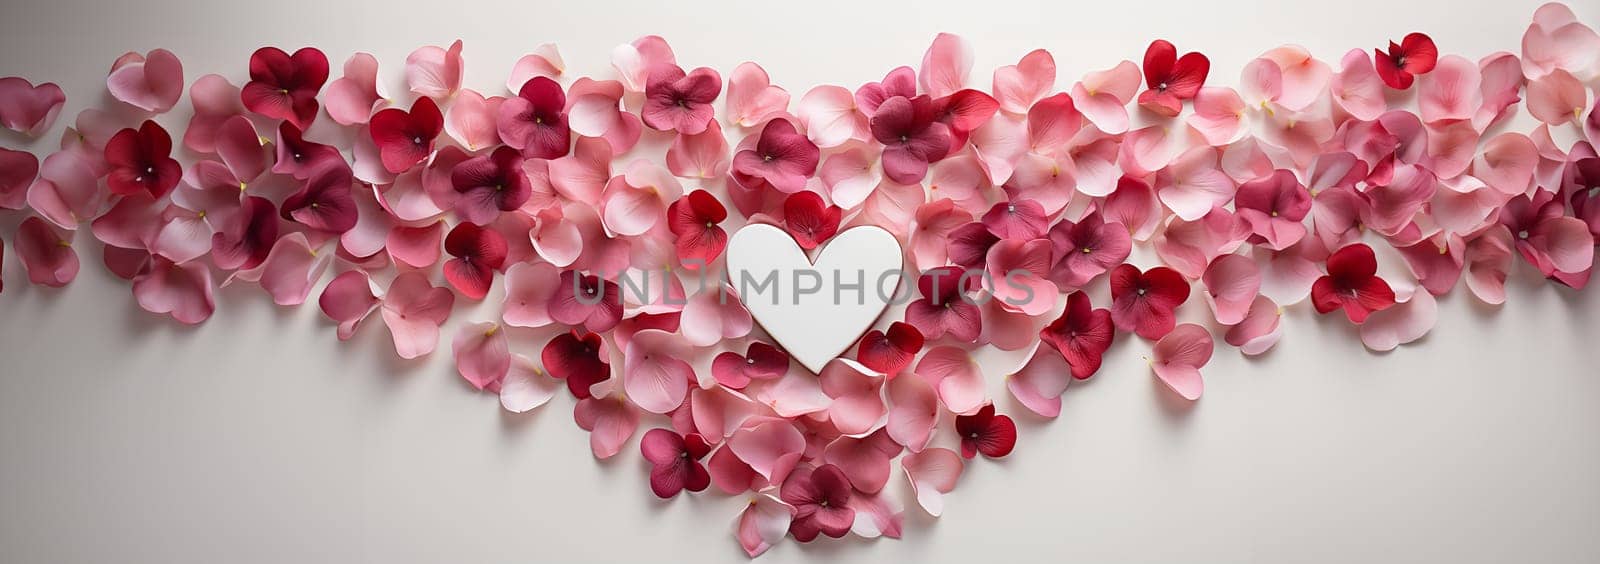 Romantic Valentine background, pink,red rose petals. Valentines Day Heart Made of Red Roses Isolated on White Background. Copy space